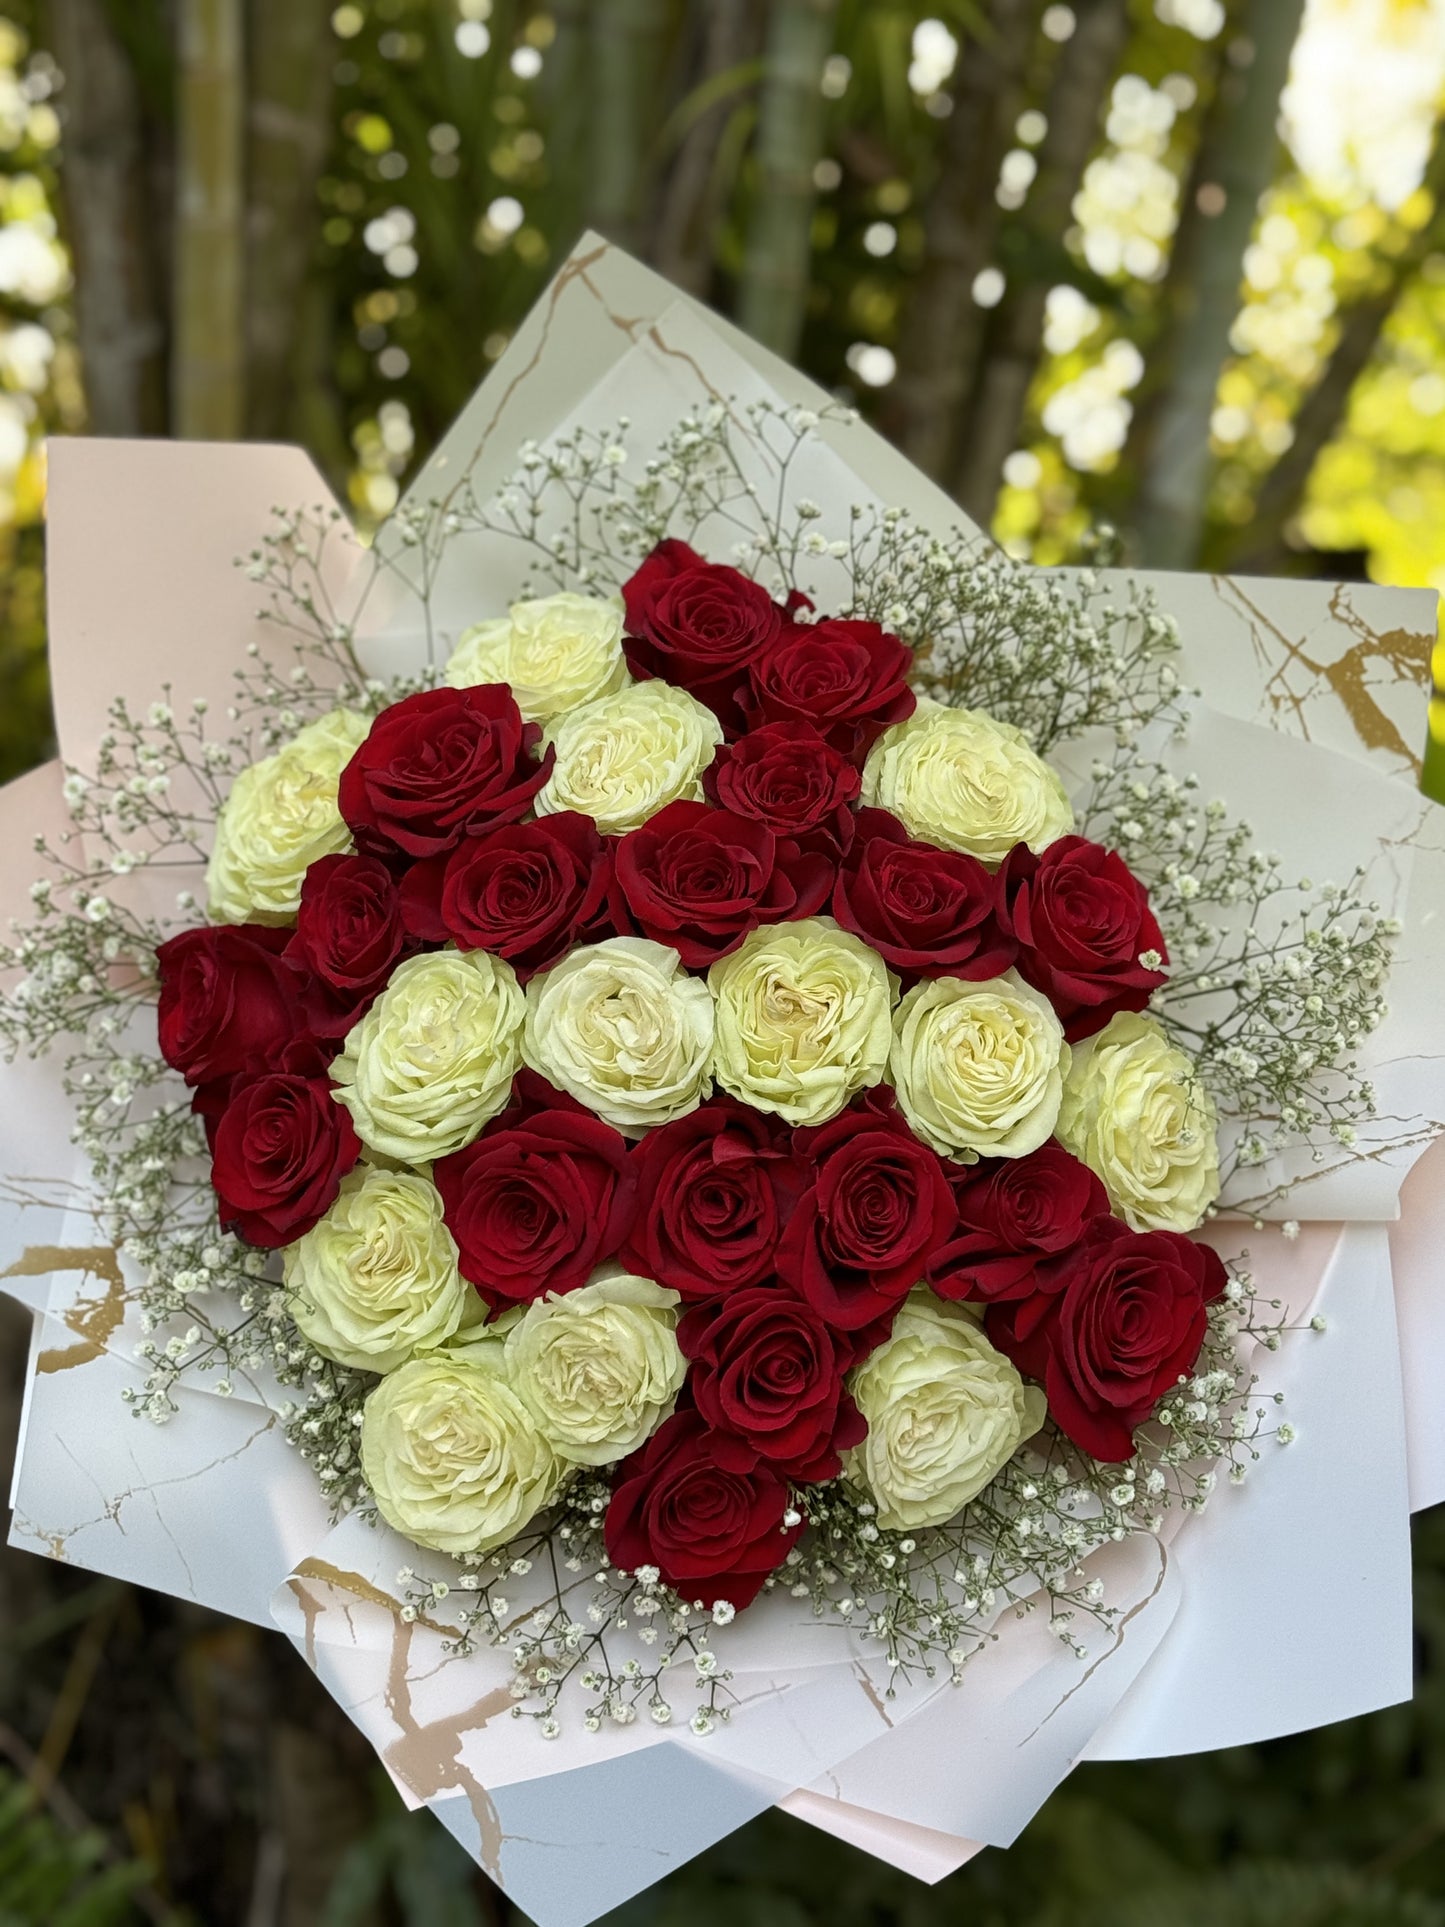 Red & White Rose Bouquet